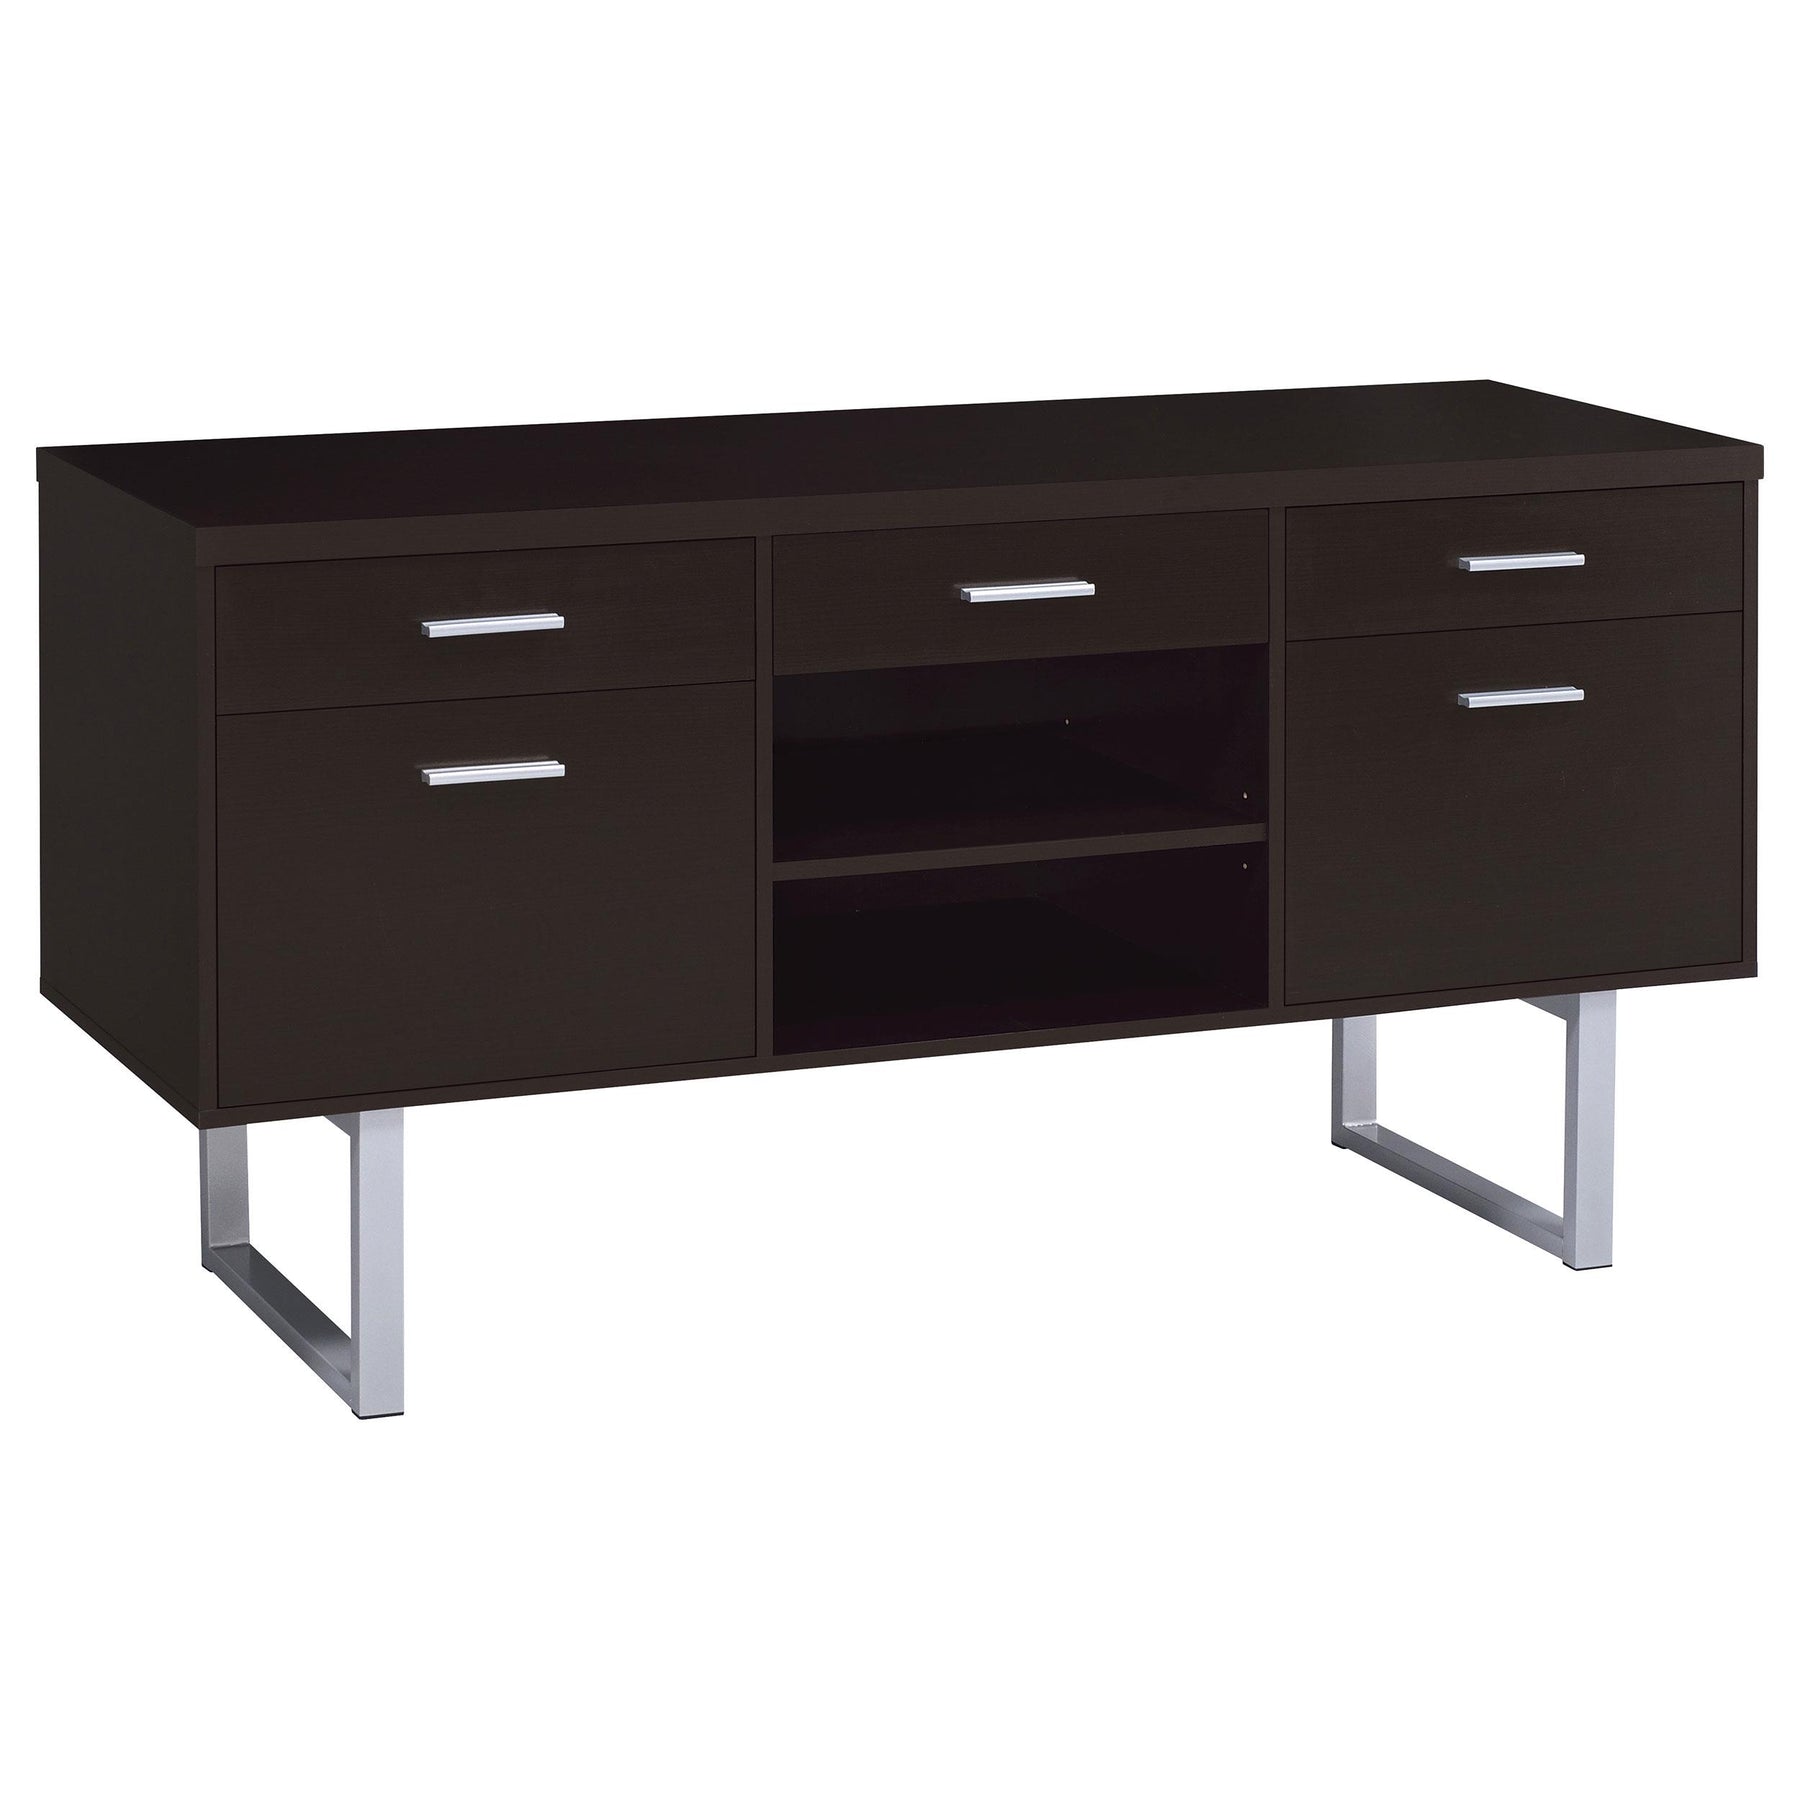 Lawtey 5-drawer Credenza with Adjustable Shelf Cappuccino  Las Vegas Furniture Stores